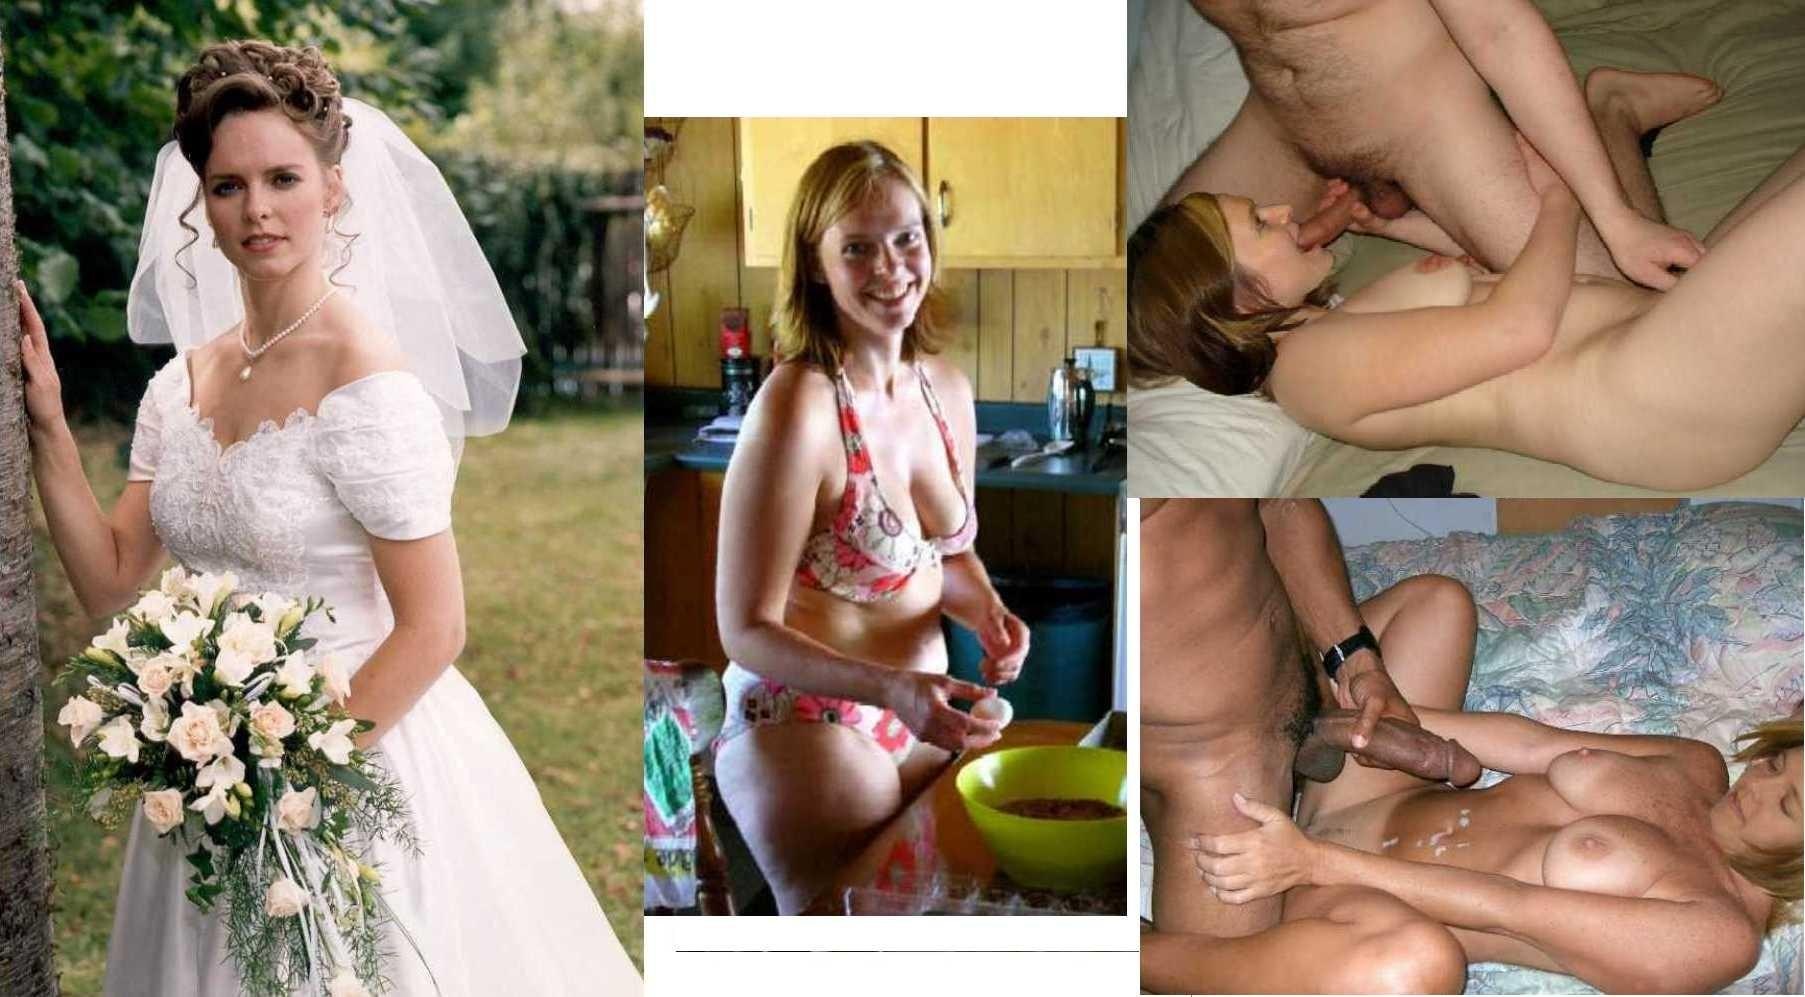 porn pictures of married women